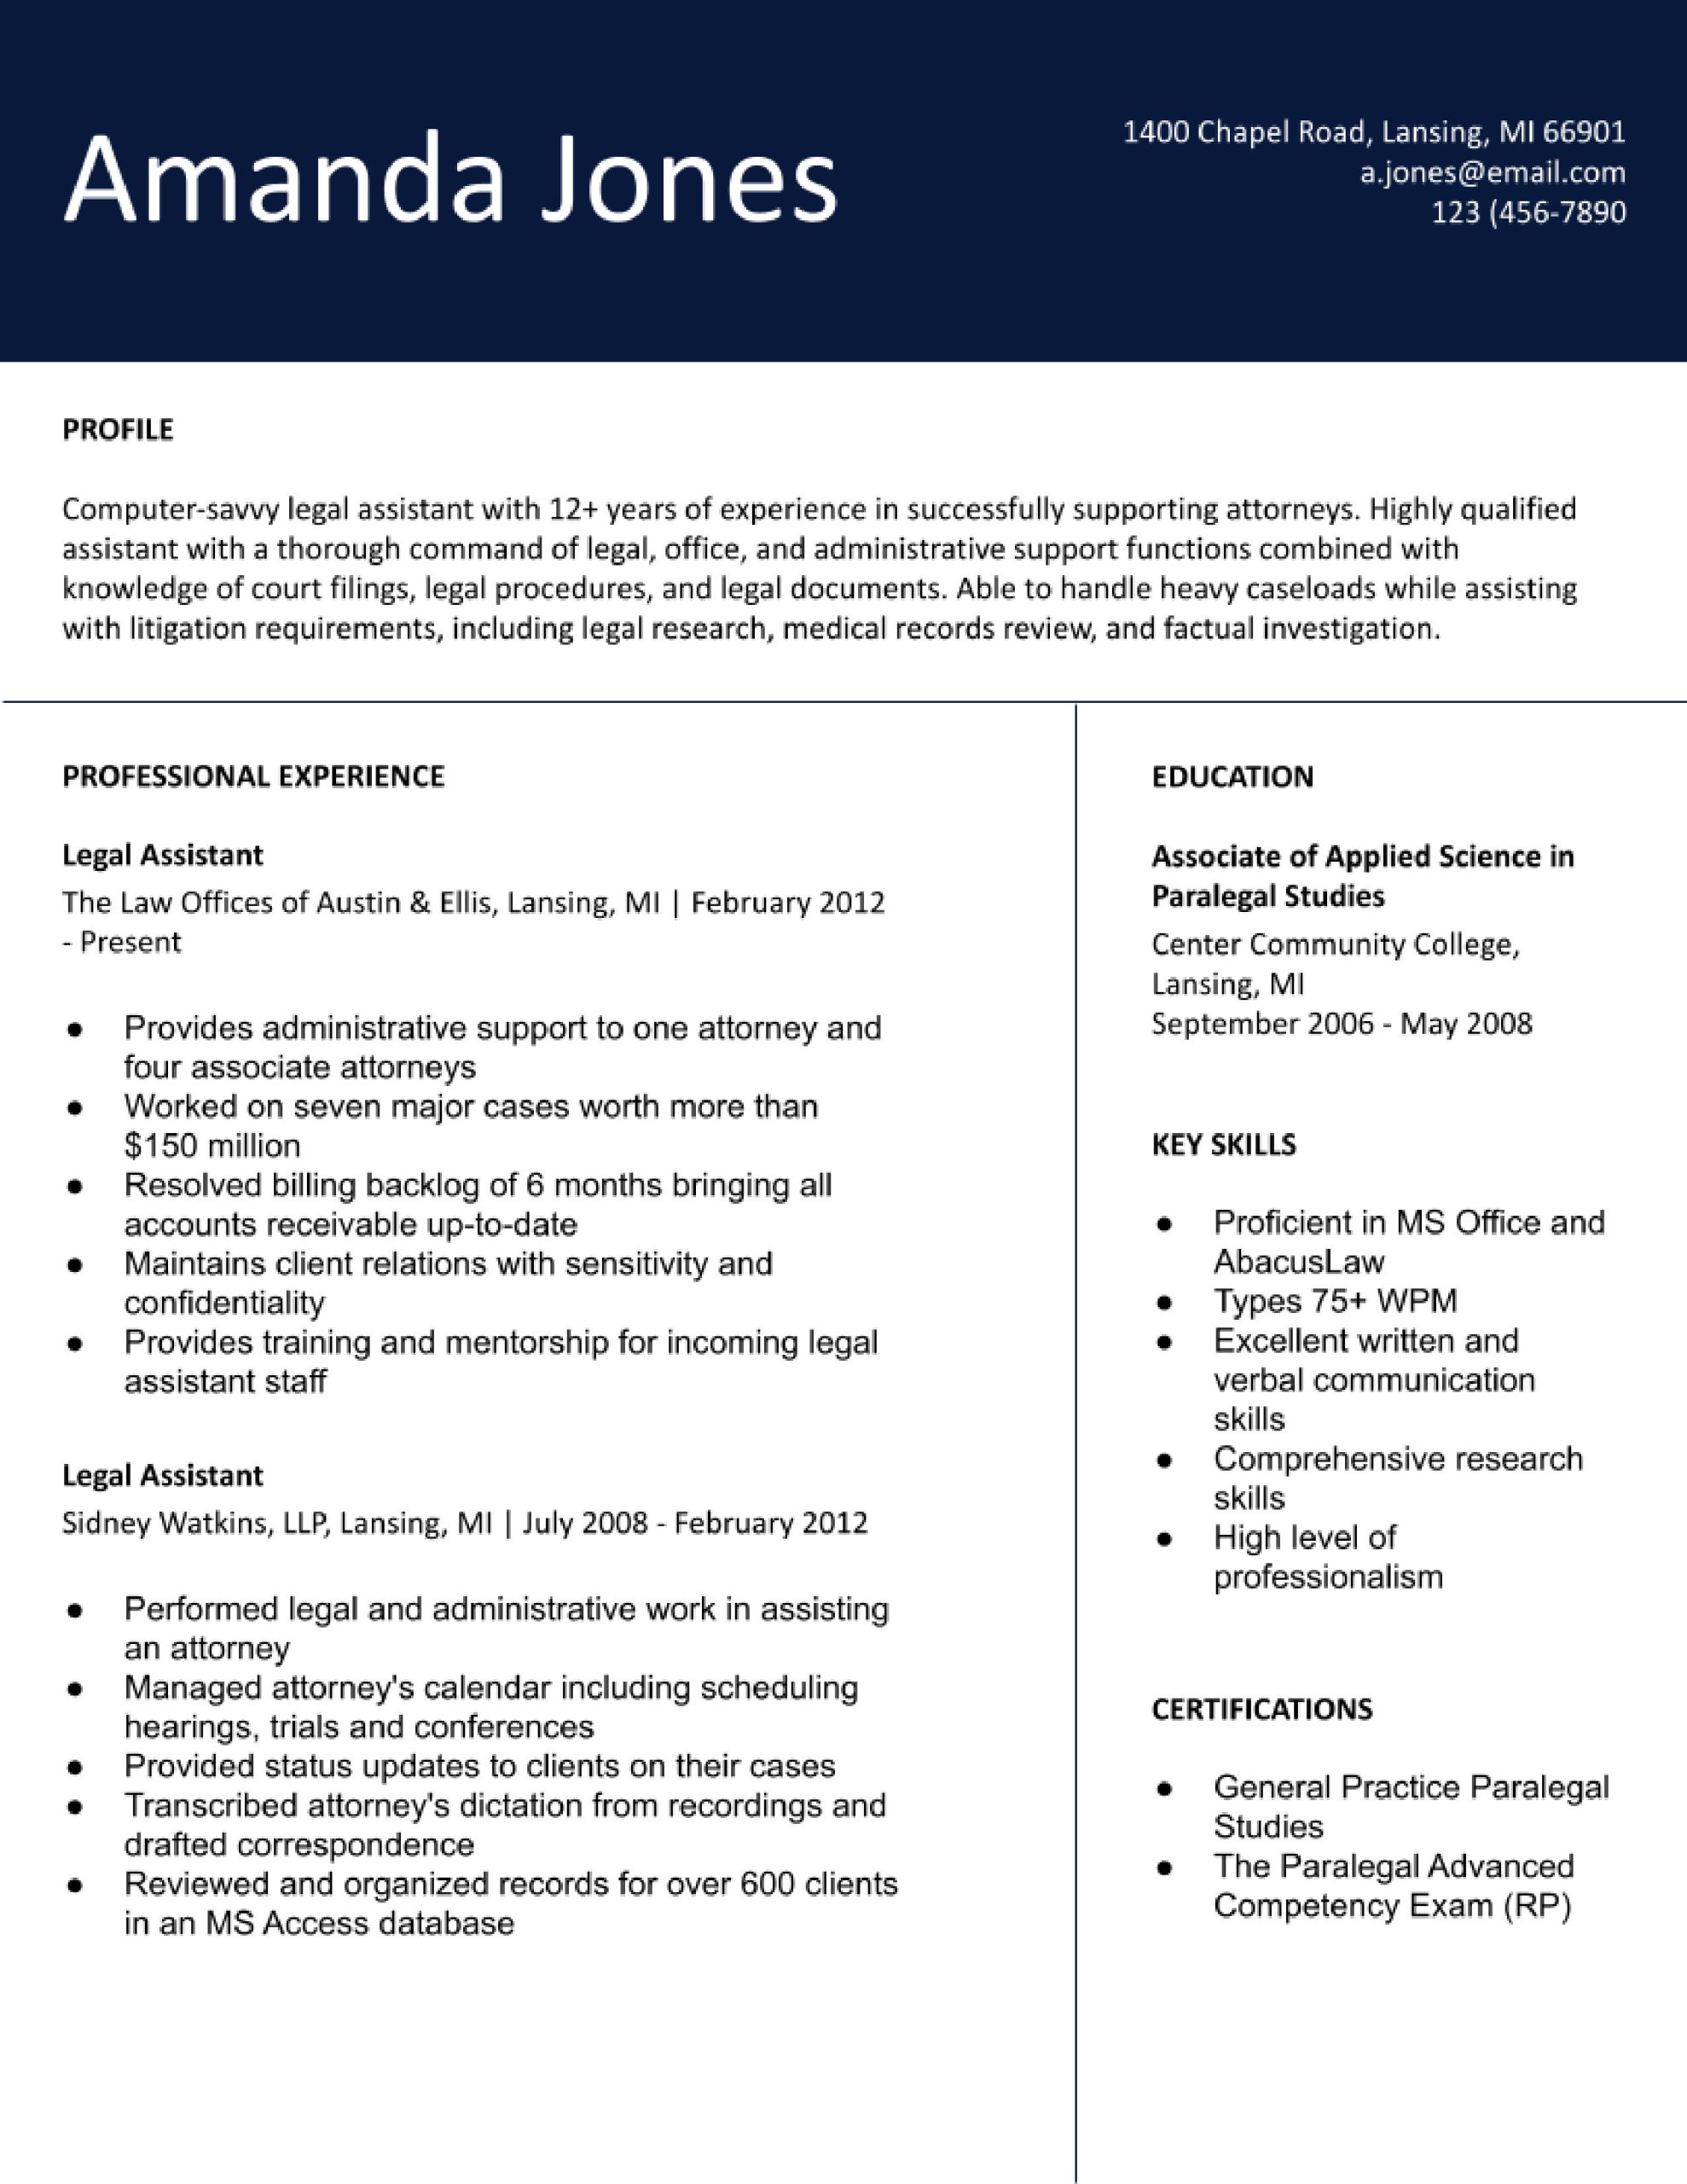 Free Sample Resume for Legal assistant Legal assistant Resume Examples In 2022 – Resumebuilder.com